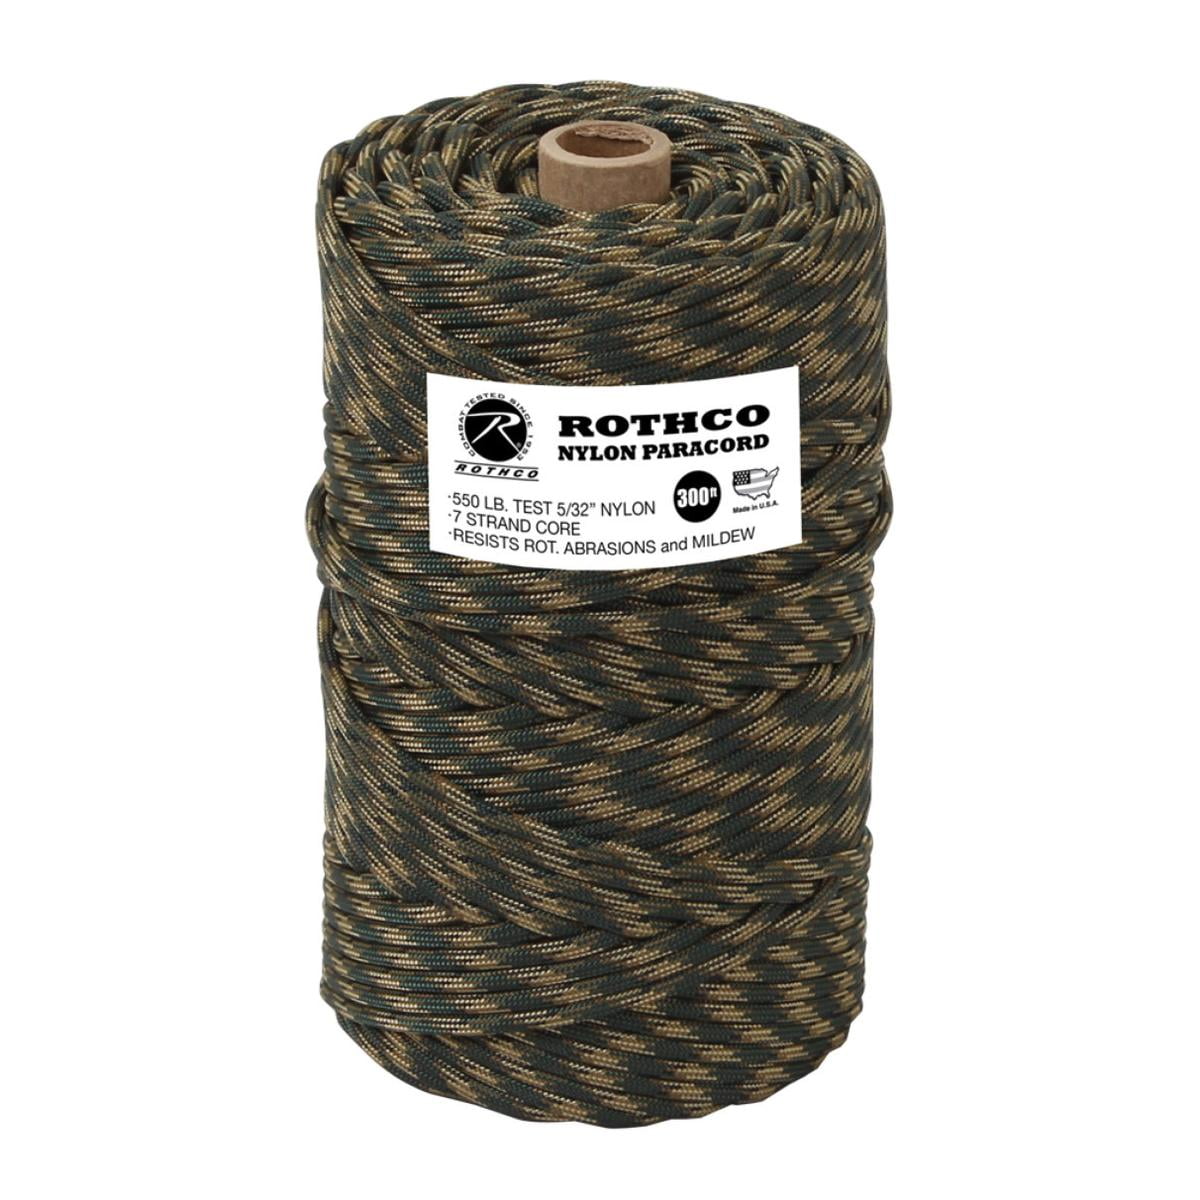 PARACORD PLANET Outdoor Mil-Spec 550 & 850lb Paracord 100 Feet of Parachute Cord 